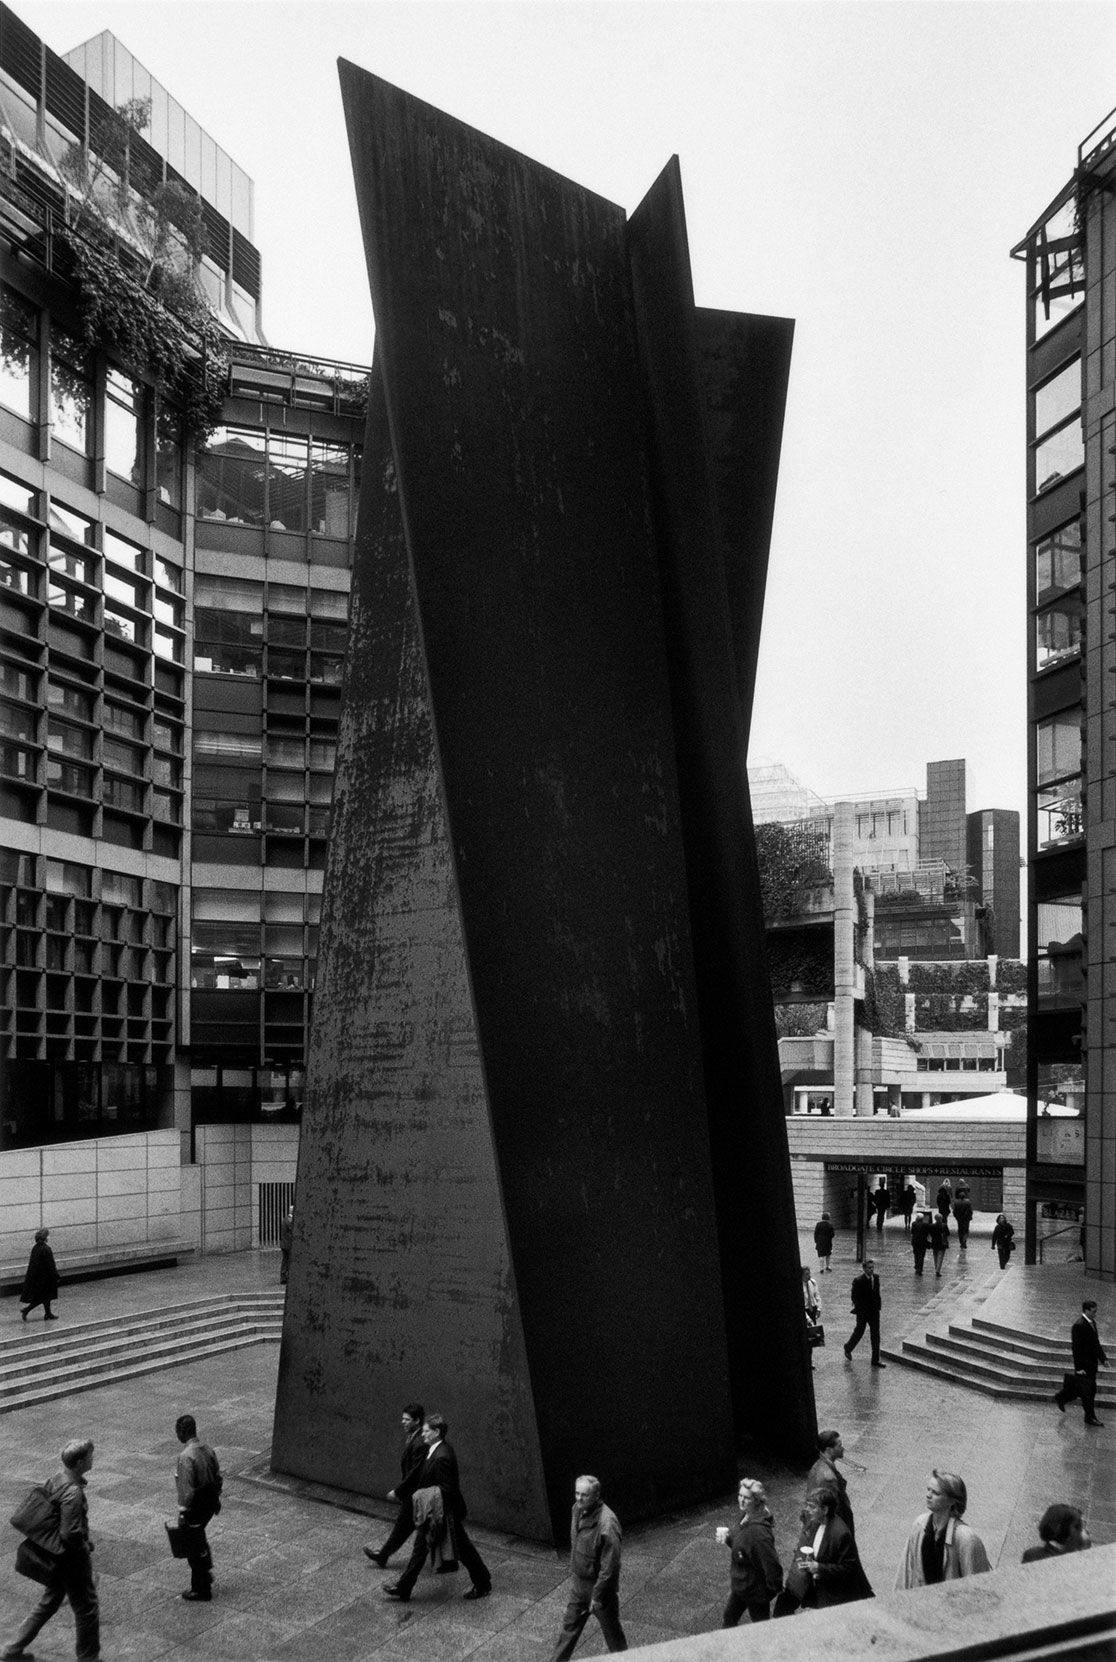 A sculpture by Richard Serra made of five trapezoidal steel slabs, titled Fulcrum, dated 1986-87.